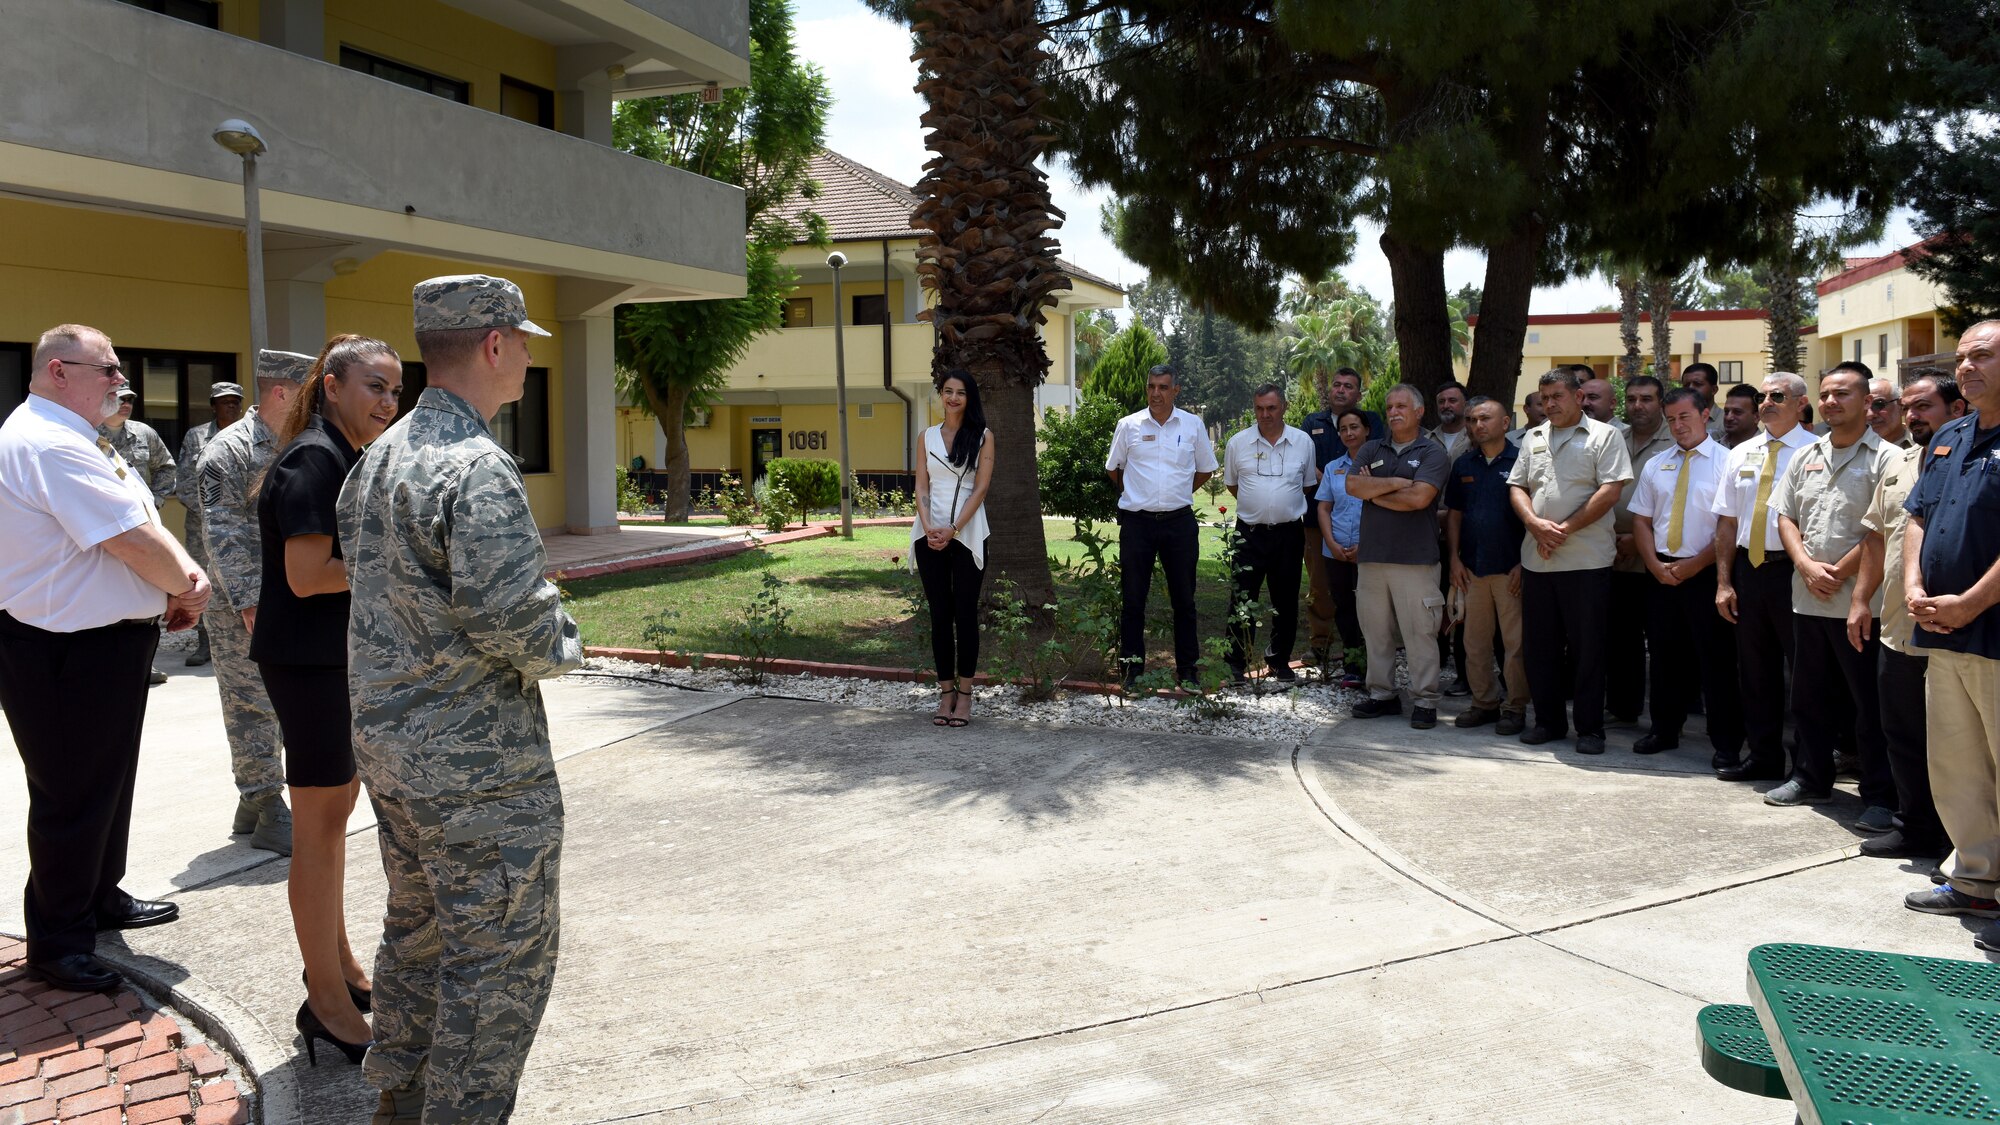 U.S. Air Force Col. Britt Hurst, 39th Air Base Wing commander, congratulates 39th FSS lodging team for winning the 2018 Air Force Innkeeper Award, Large Category for lodging operations at Incirlik Air Base, Turkey, July 18, 2018.